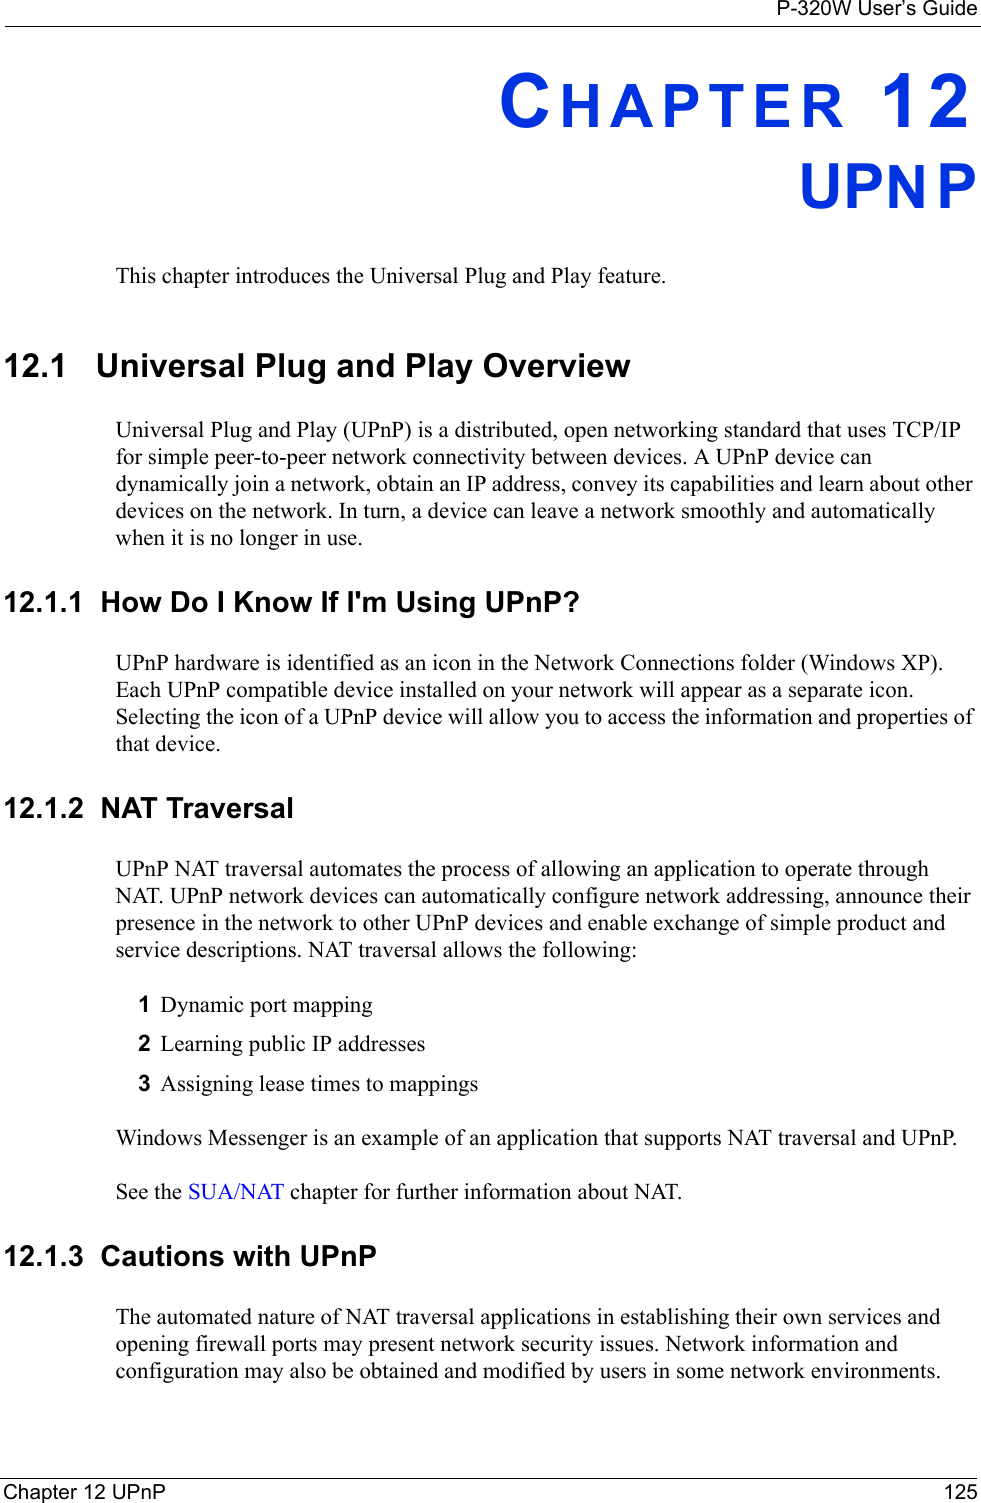 P-320W User’s GuideChapter 12 UPnP 125CHAPTER 12UPNPThis chapter introduces the Universal Plug and Play feature.12.1   Universal Plug and Play OverviewUniversal Plug and Play (UPnP) is a distributed, open networking standard that uses TCP/IP for simple peer-to-peer network connectivity between devices. A UPnP device can dynamically join a network, obtain an IP address, convey its capabilities and learn about other devices on the network. In turn, a device can leave a network smoothly and automatically when it is no longer in use.12.1.1  How Do I Know If I&apos;m Using UPnP?UPnP hardware is identified as an icon in the Network Connections folder (Windows XP). Each UPnP compatible device installed on your network will appear as a separate icon. Selecting the icon of a UPnP device will allow you to access the information and properties of that device. 12.1.2  NAT TraversalUPnP NAT traversal automates the process of allowing an application to operate through NAT. UPnP network devices can automatically configure network addressing, announce their presence in the network to other UPnP devices and enable exchange of simple product and service descriptions. NAT traversal allows the following:1Dynamic port mapping2Learning public IP addresses3Assigning lease times to mappingsWindows Messenger is an example of an application that supports NAT traversal and UPnP. See the SUA/NAT chapter for further information about NAT. 12.1.3  Cautions with UPnPThe automated nature of NAT traversal applications in establishing their own services and opening firewall ports may present network security issues. Network information and configuration may also be obtained and modified by users in some network environments. 